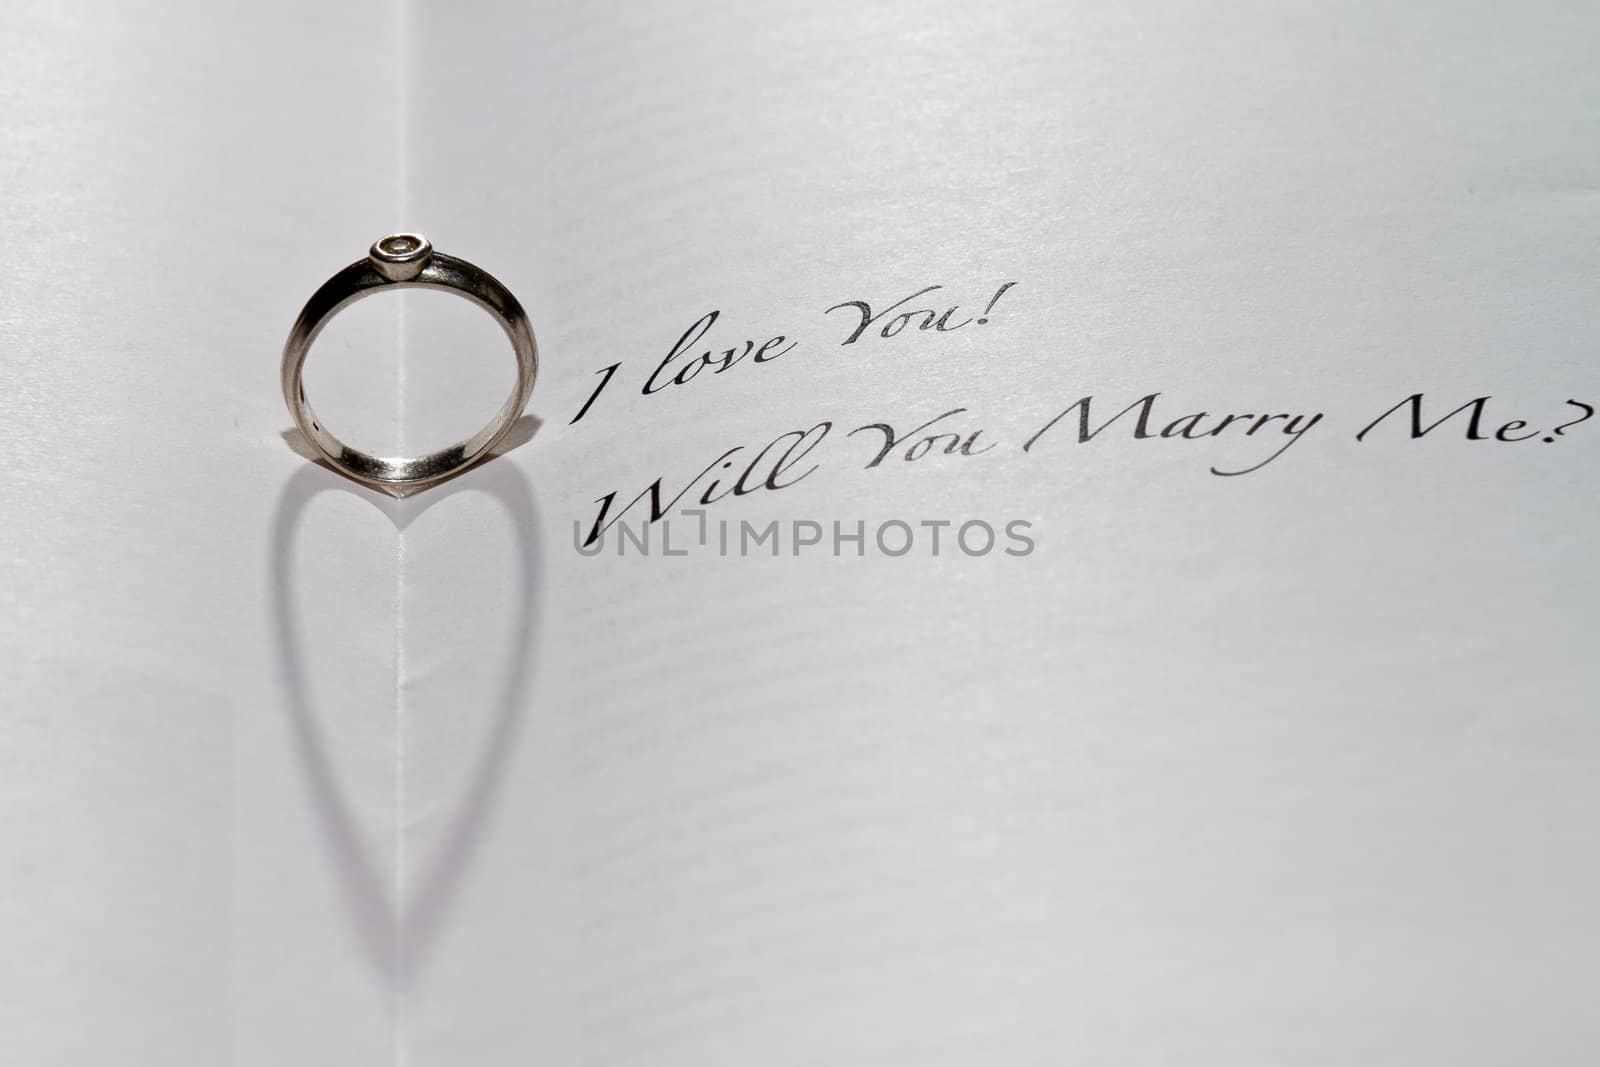 Ring casting heart shadow in book with the sentence "I Love You! Will You Marry Me?"